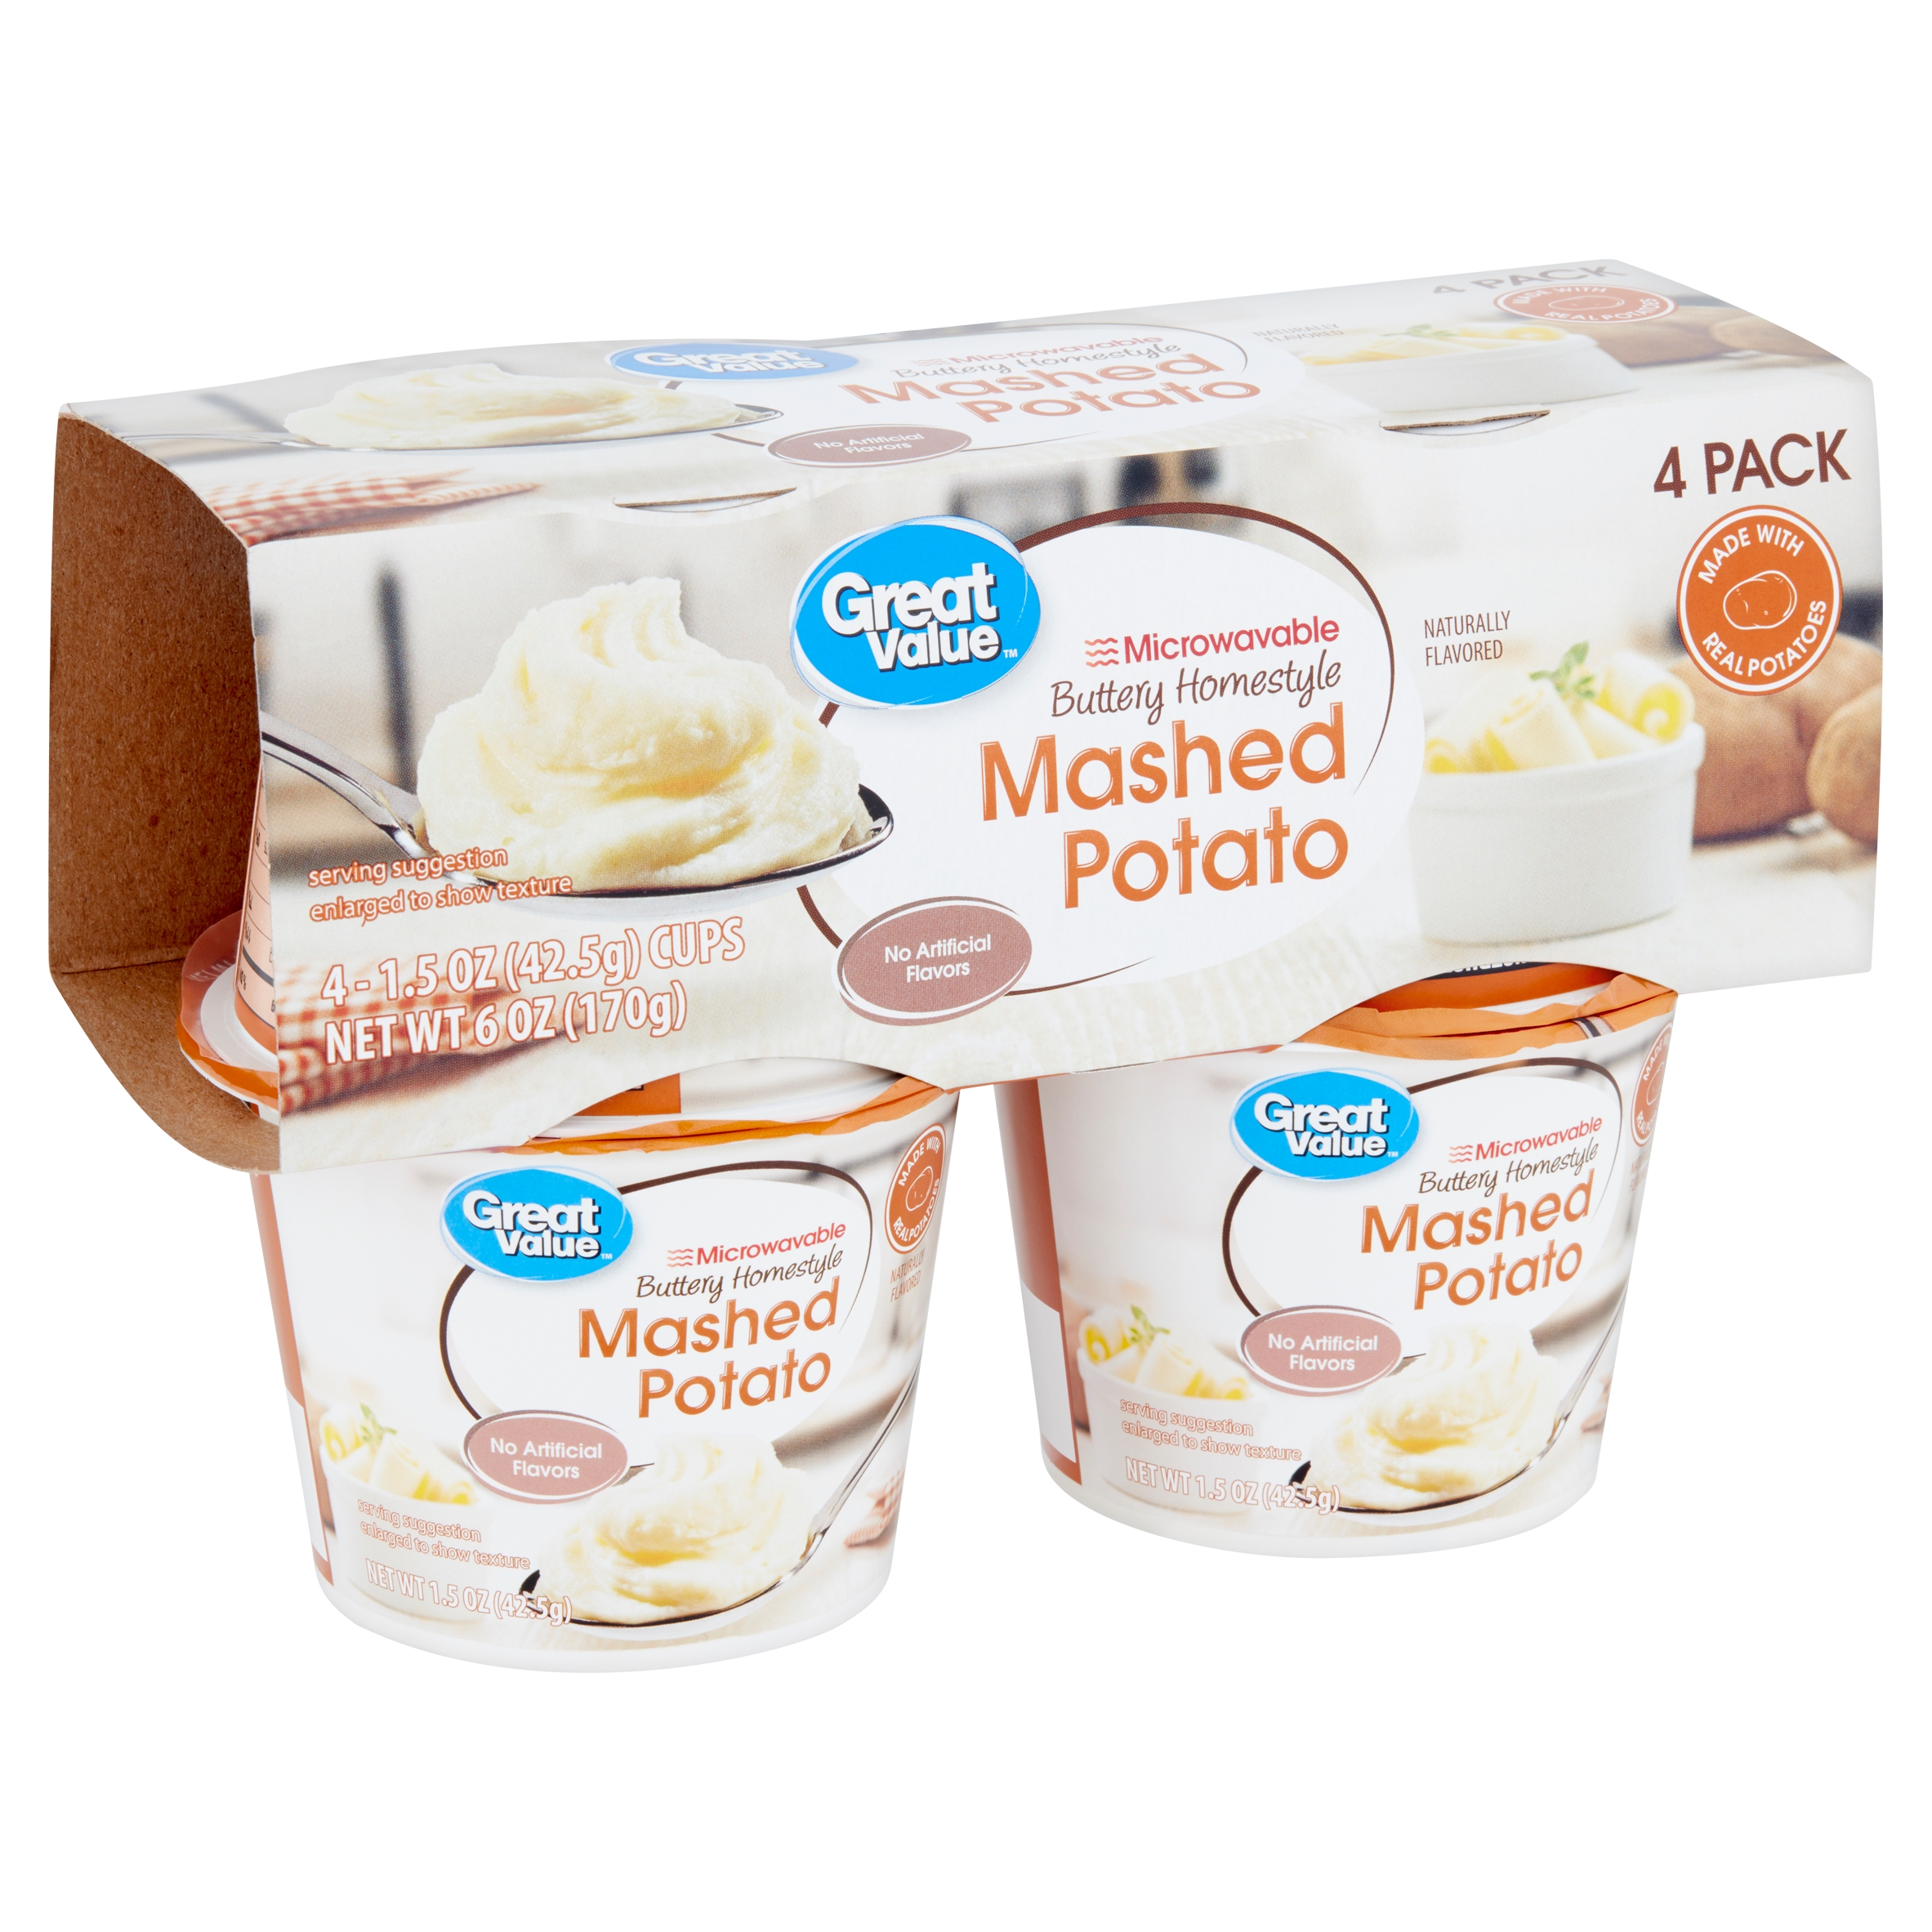 Great Value Microwavable Buttery Flavored Mashed Potato 1.5 Oz 4 Count